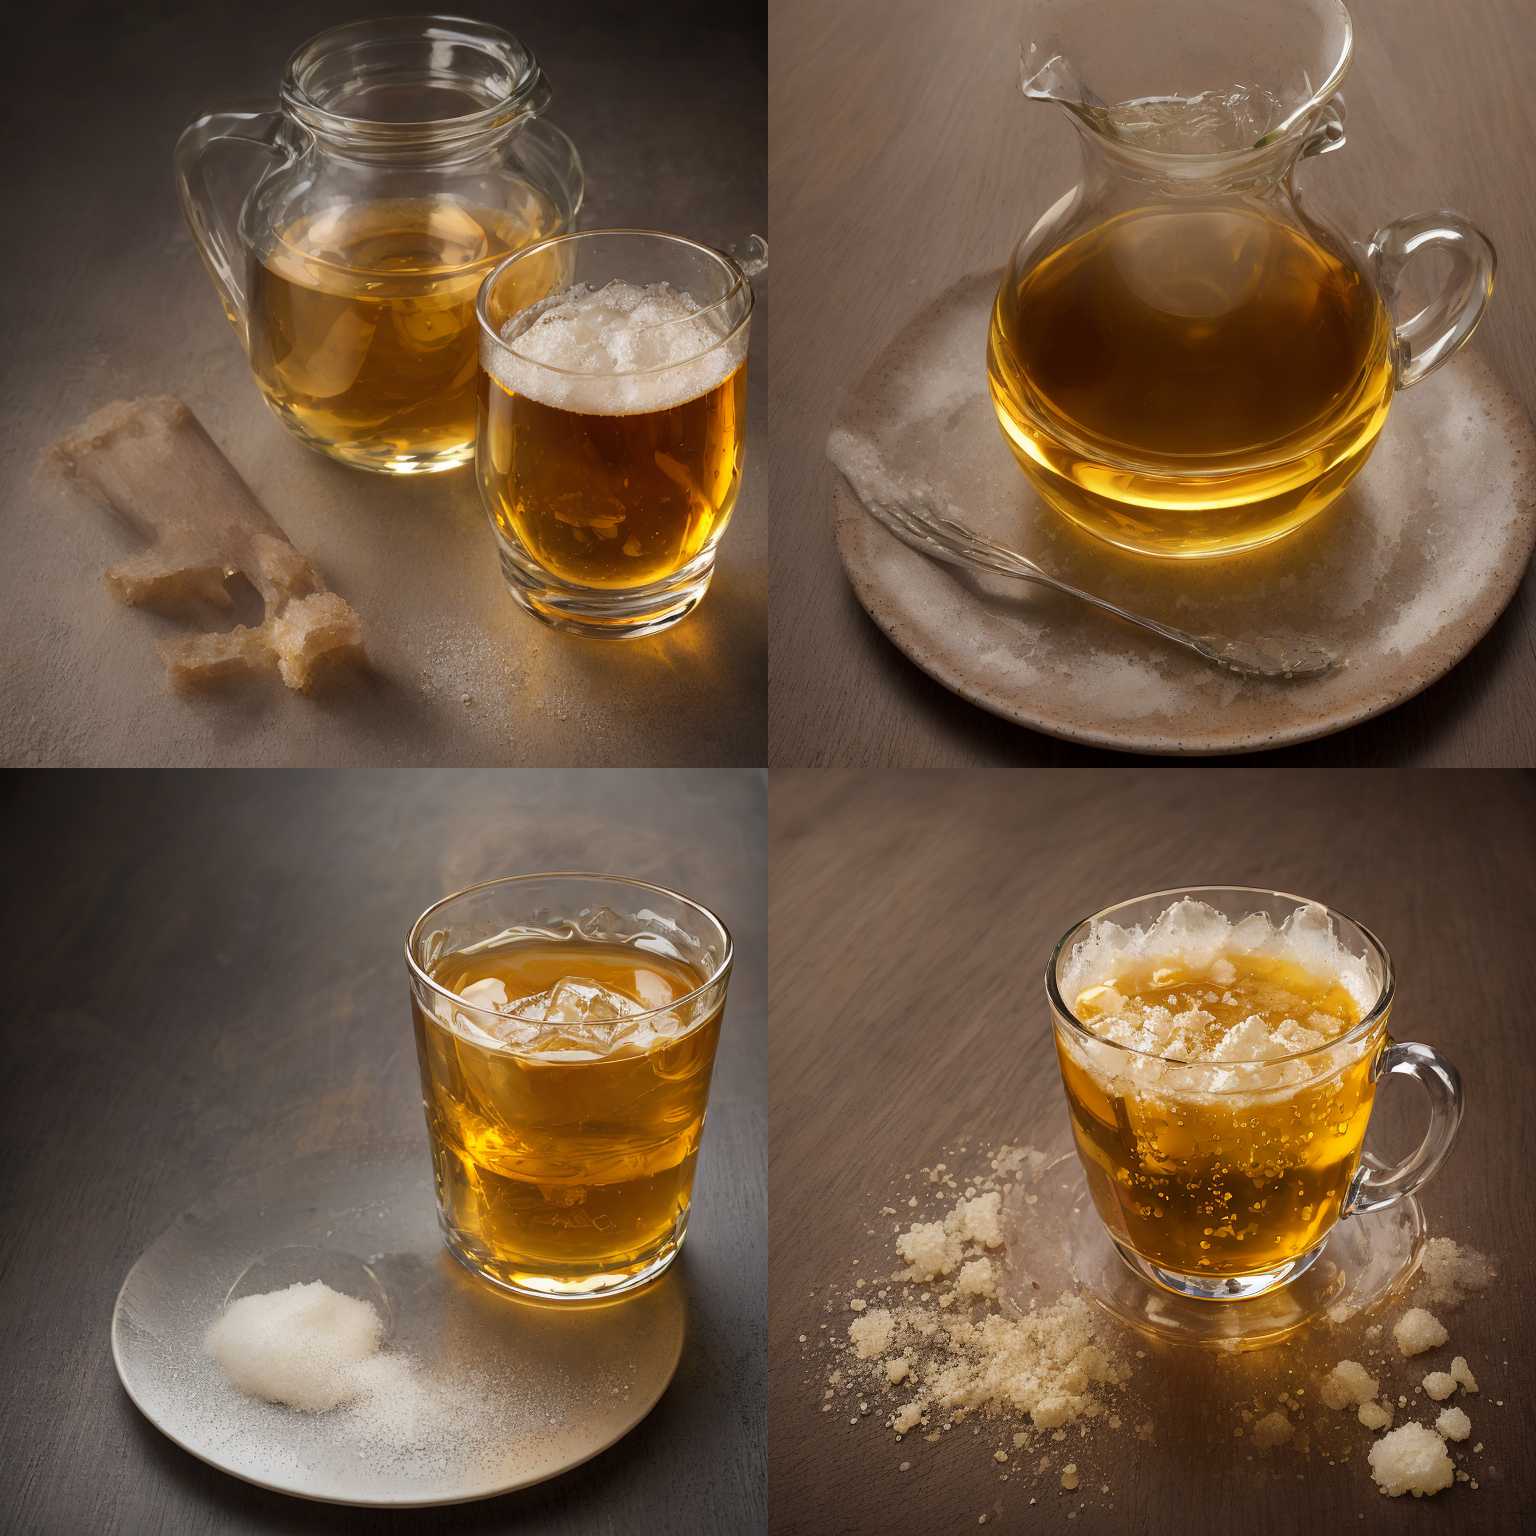 A glass of oil mixed with sugar